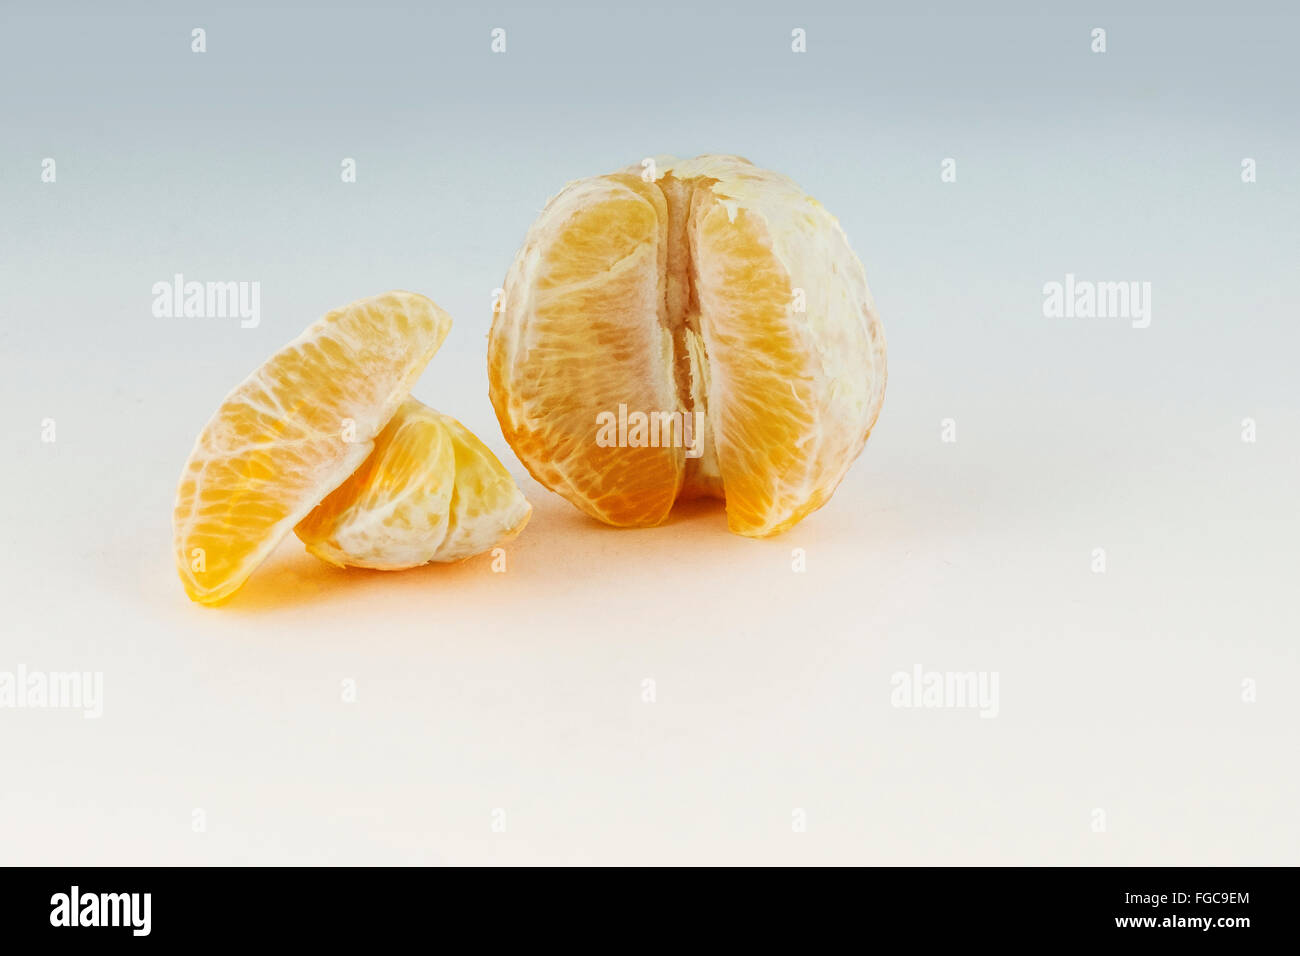 A peeled orange with sections, citrus x sinensis, on a white background with color fade. Stock Photo